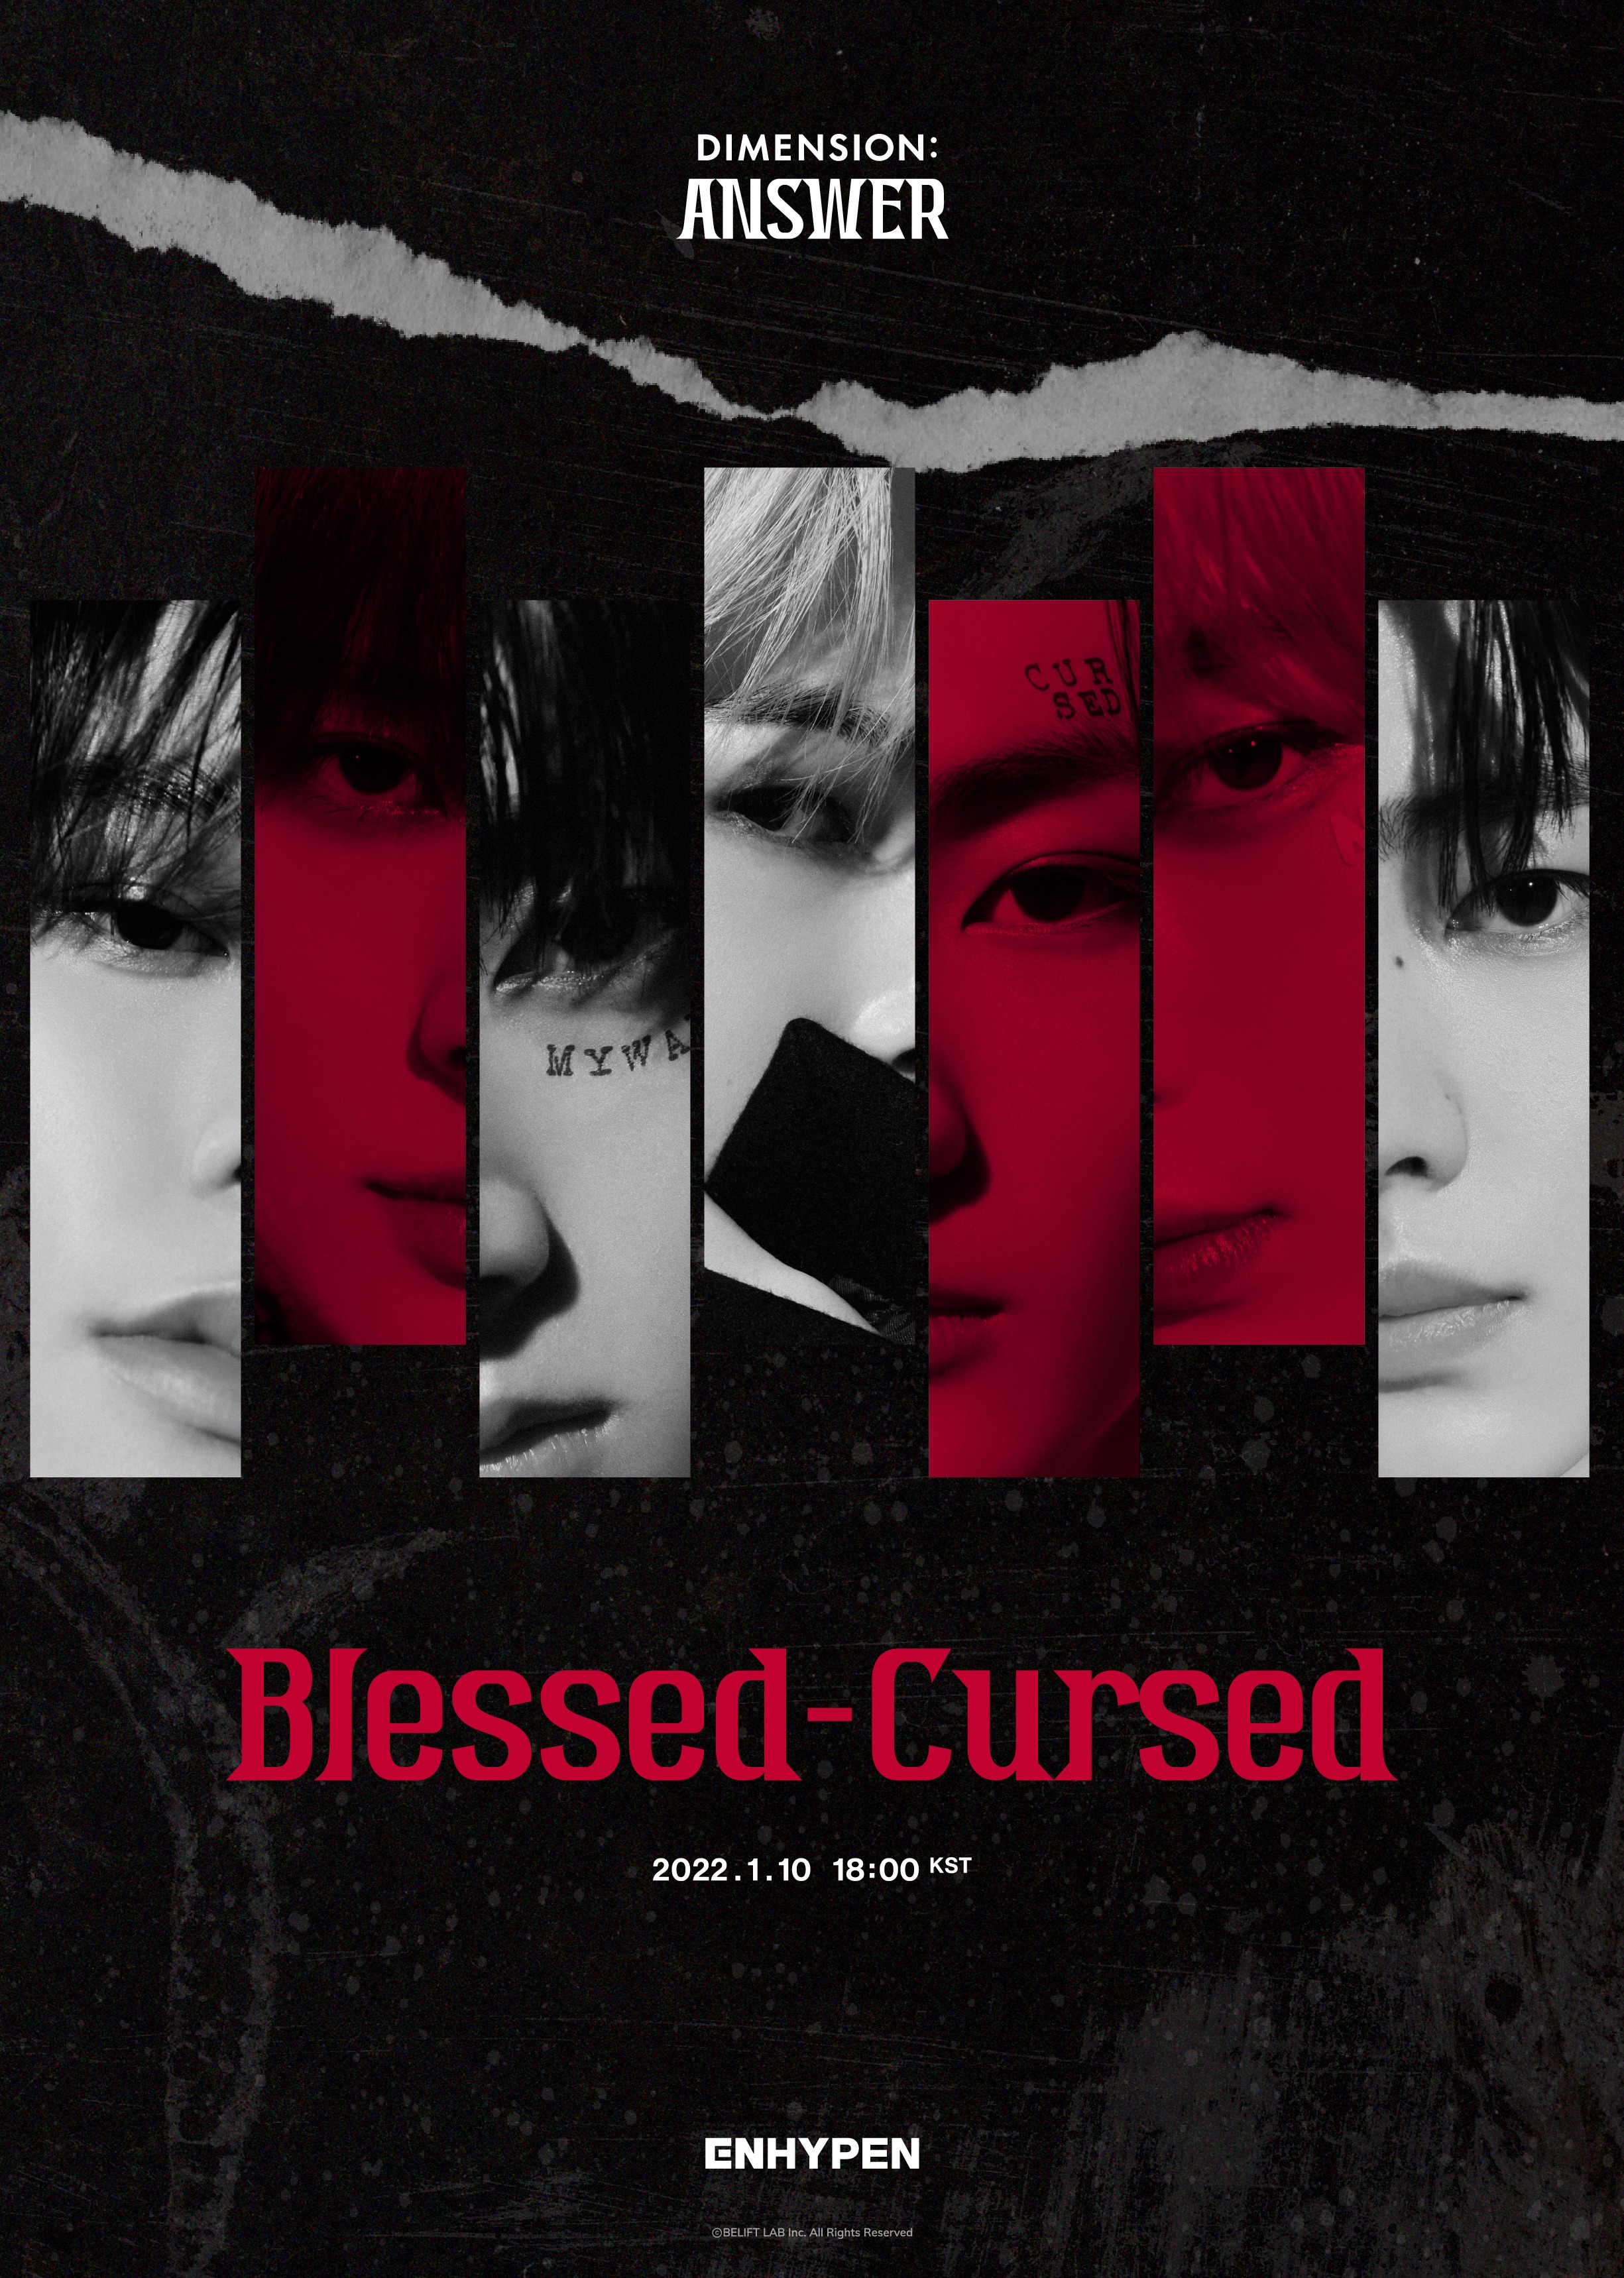 BELIFT LAB #ENHYPEN DIMENSION, ANSWER 'Blessed Cursed' Poster #DIMENSION_ANSWER #Blessed_Cursed